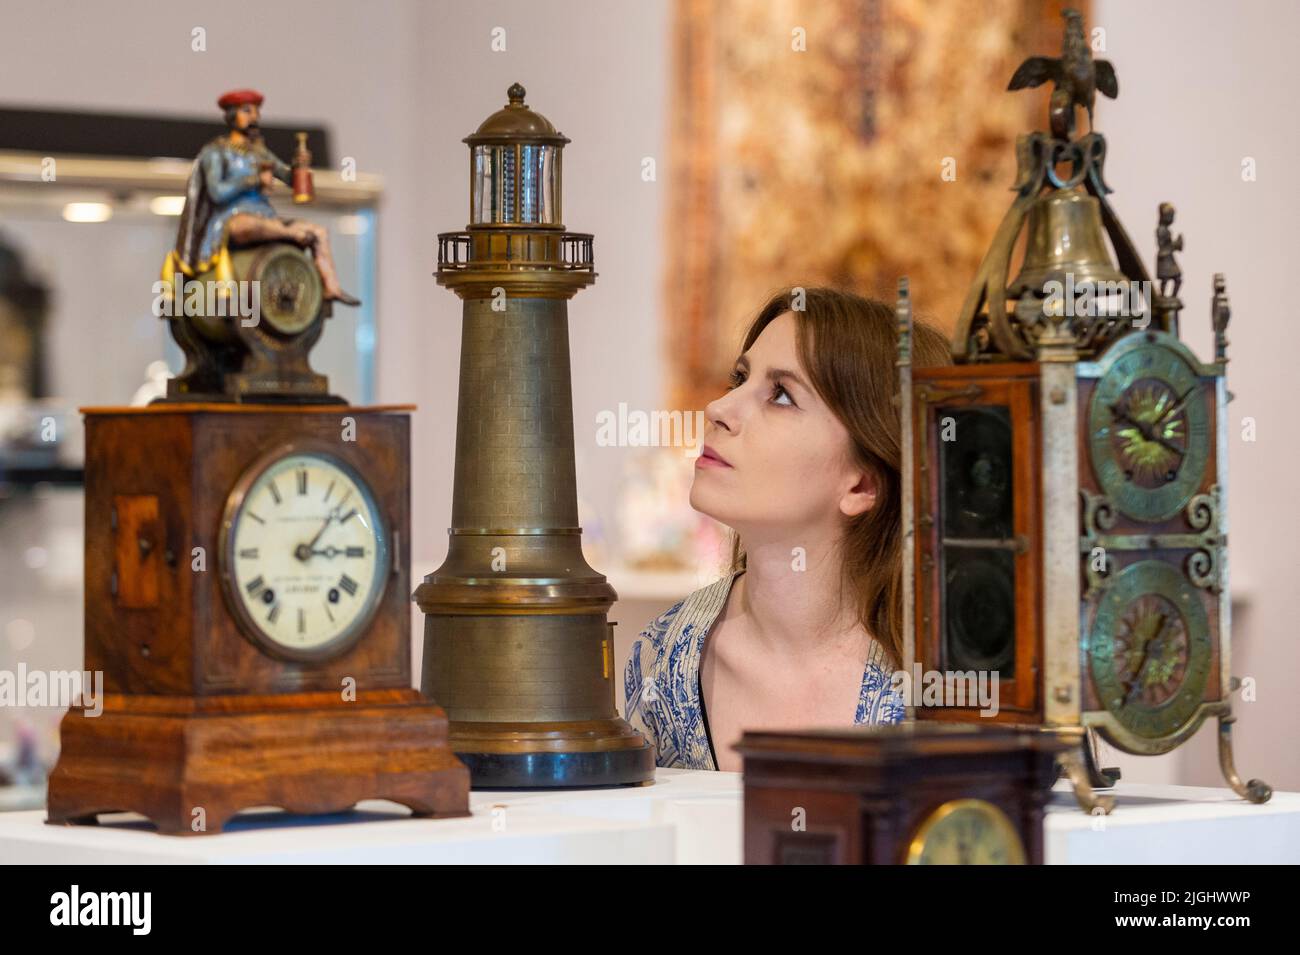 London, UK.  11 July 2022. A staff member views (C) 'A good and rare late 19th century French automata lighthouse timepiece' by Guilmet (Est. £3,000 - £4,000) at a preview of Bonhams’ Fine Clocks sale at their New Bond Street gallery. The lots will be auctioned on 14 July.  Credit: Stephen Chung / Alamy Live News Stock Photo